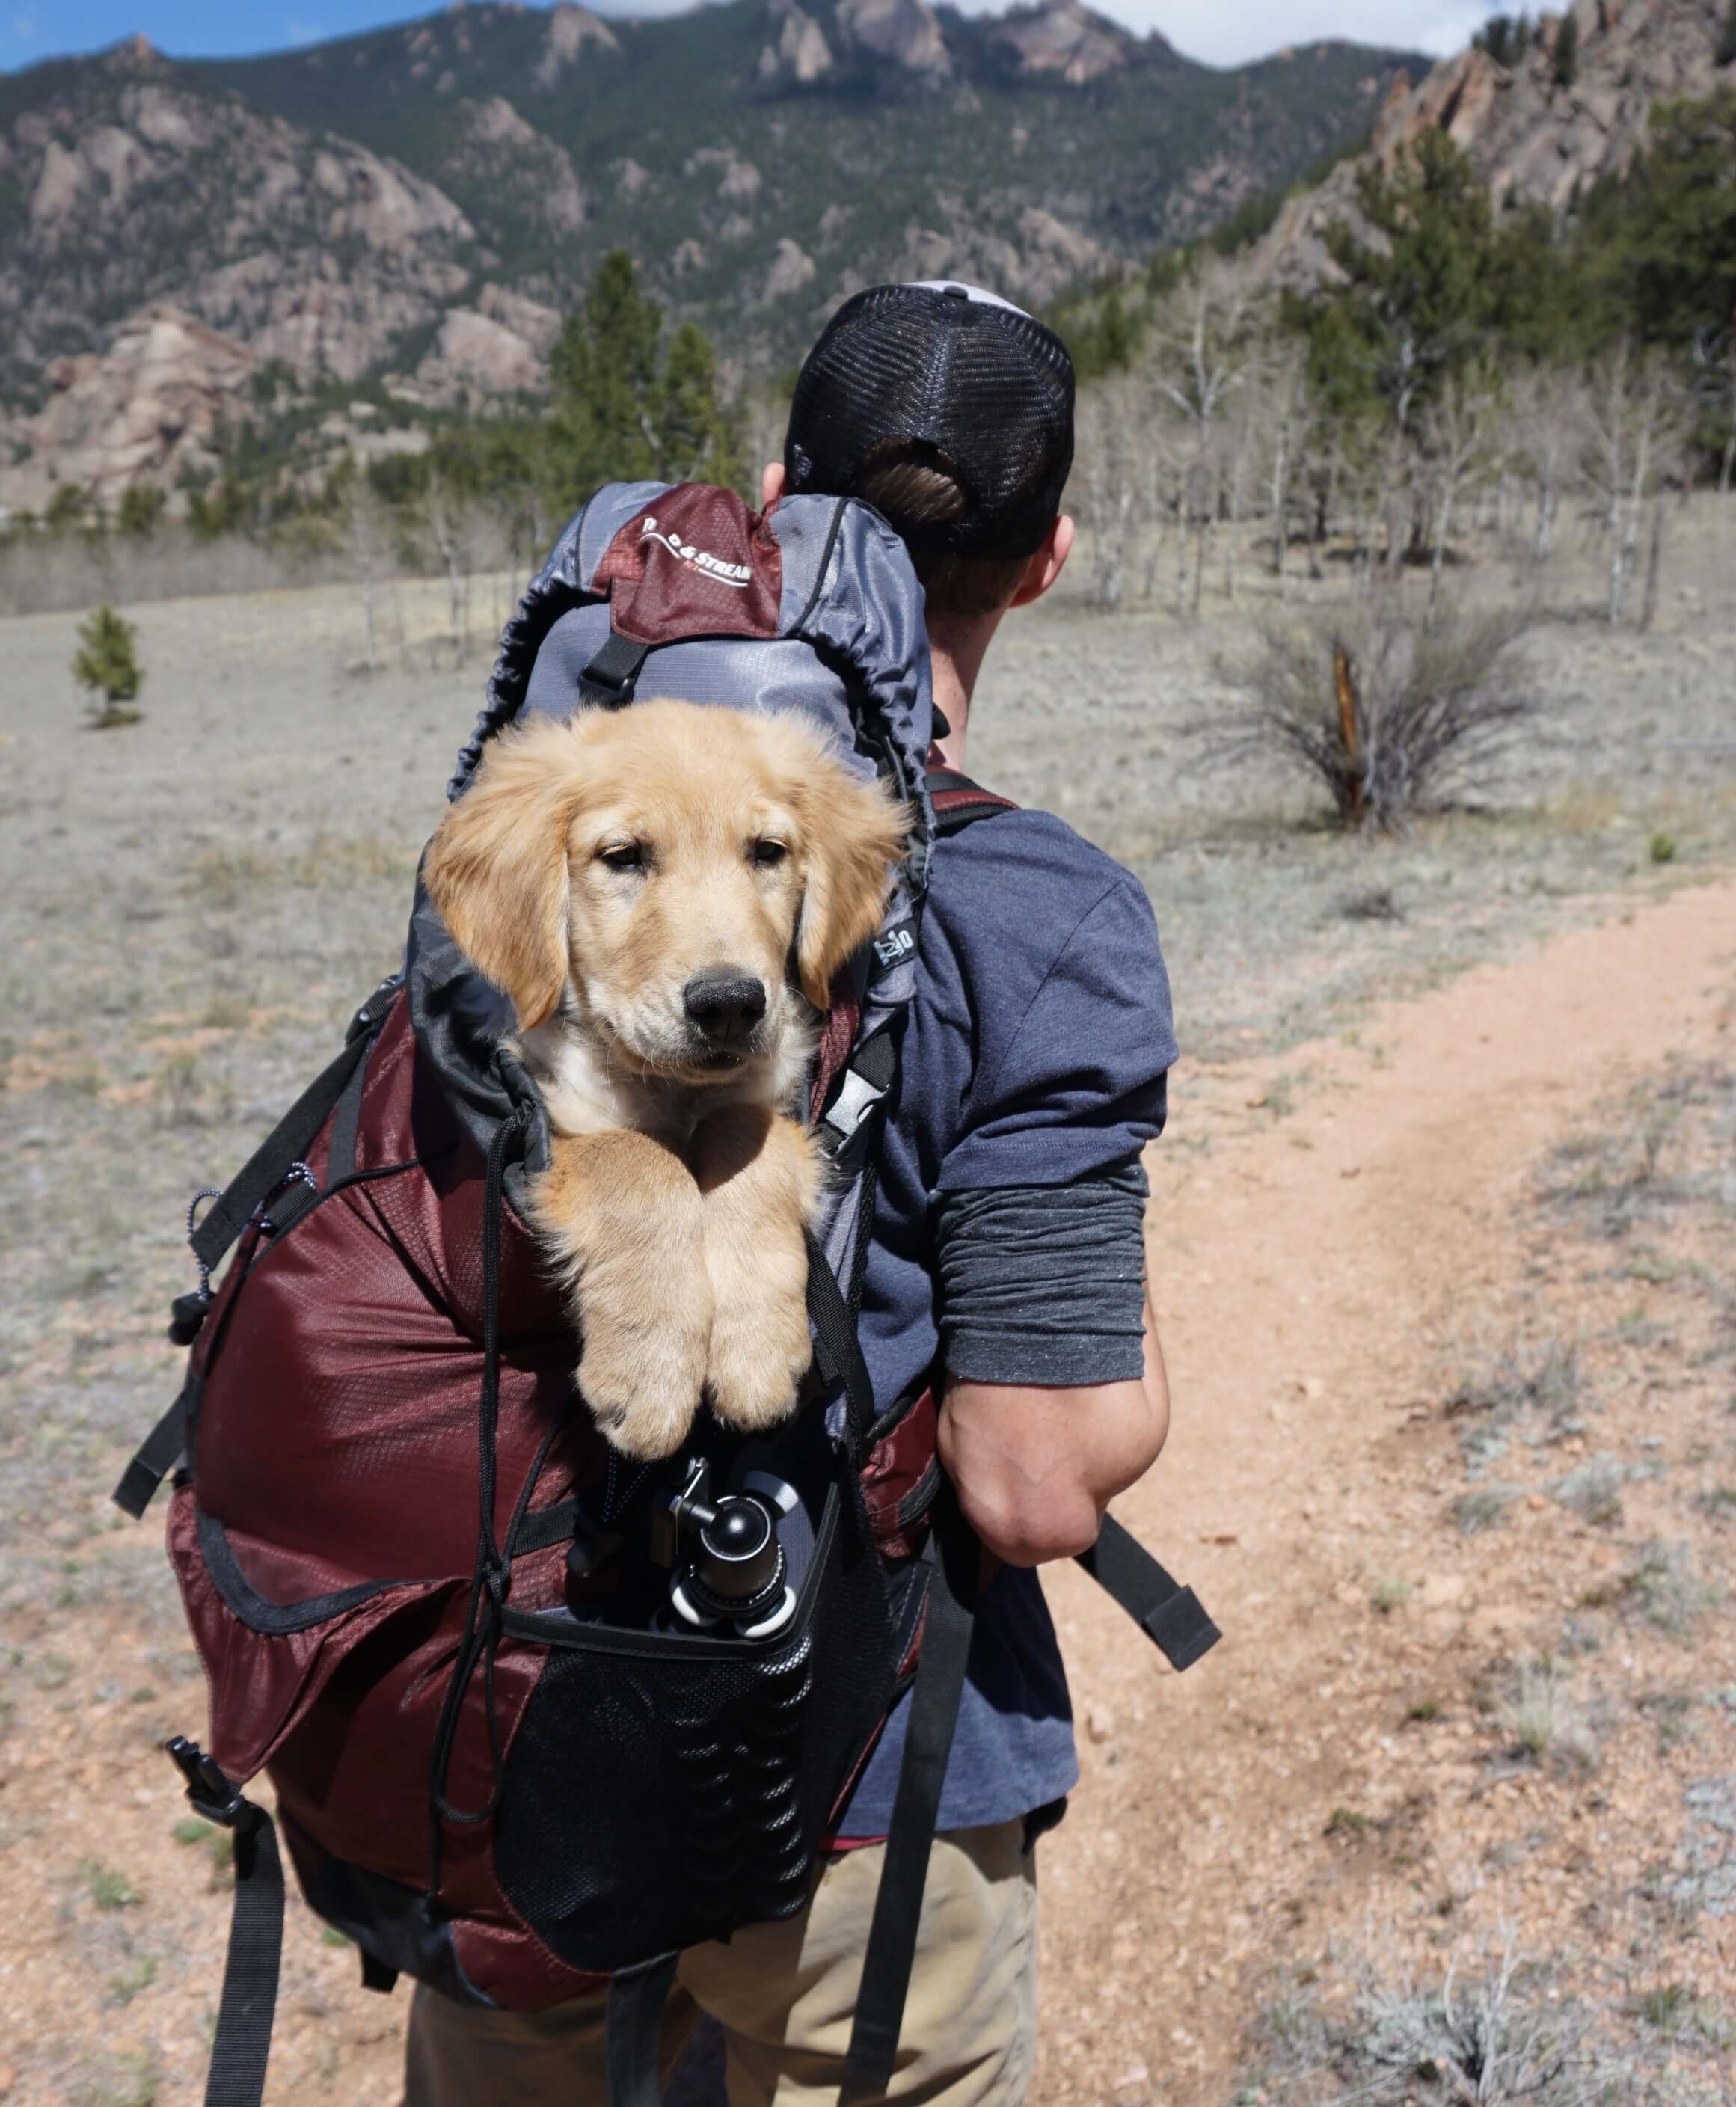 Dog being carried in walking man's backpack